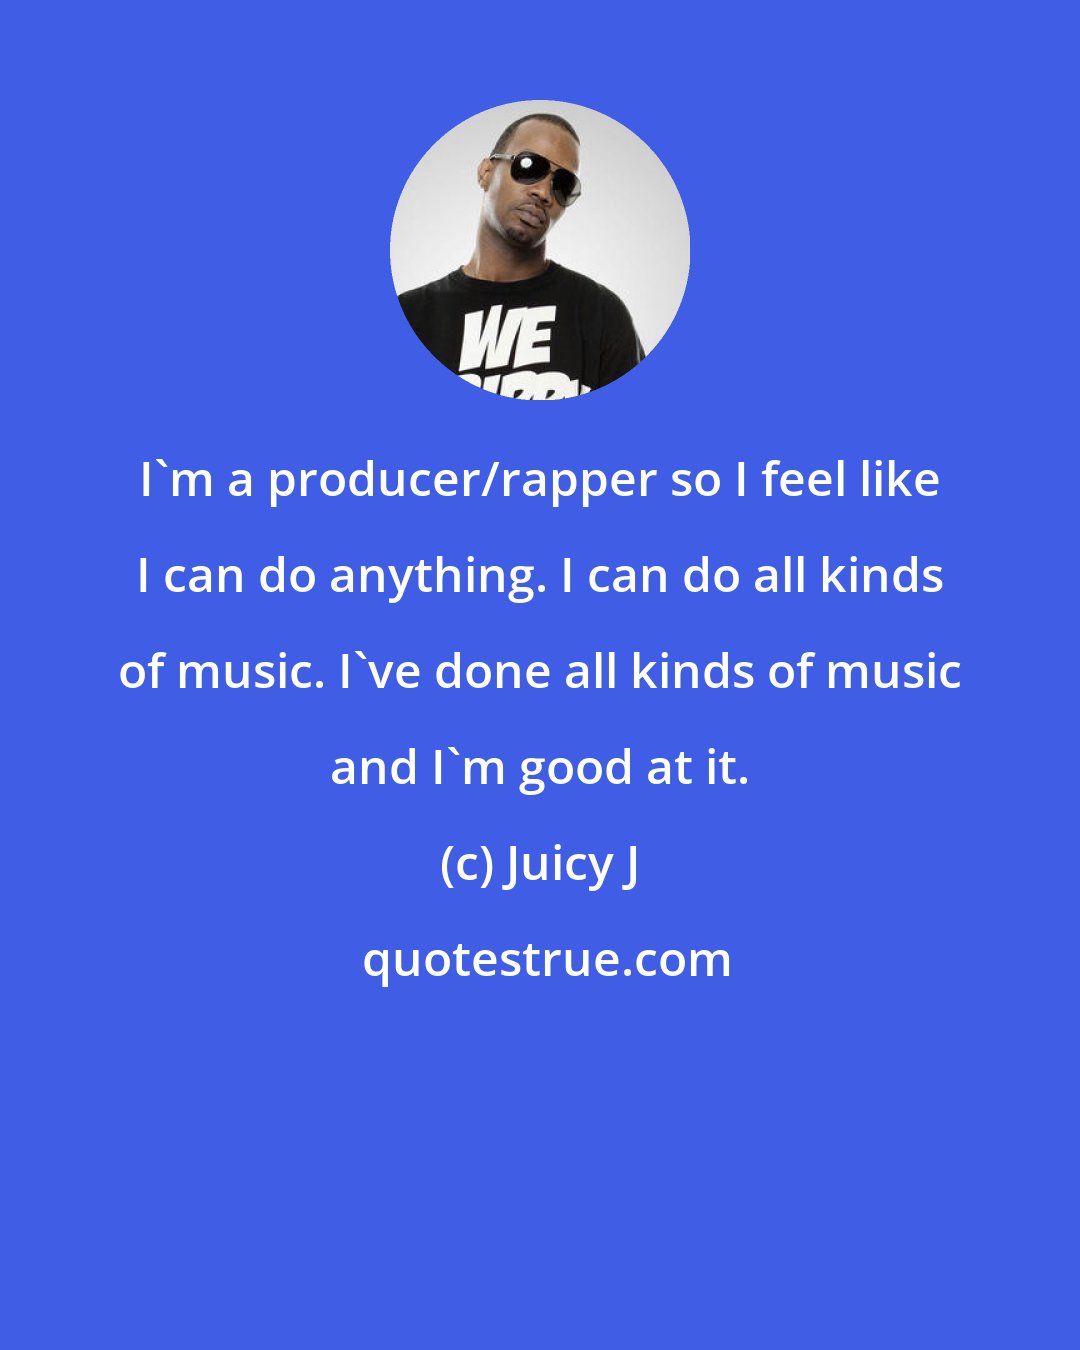 Juicy J: I'm a producer/rapper so I feel like I can do anything. I can do all kinds of music. I've done all kinds of music and I'm good at it.